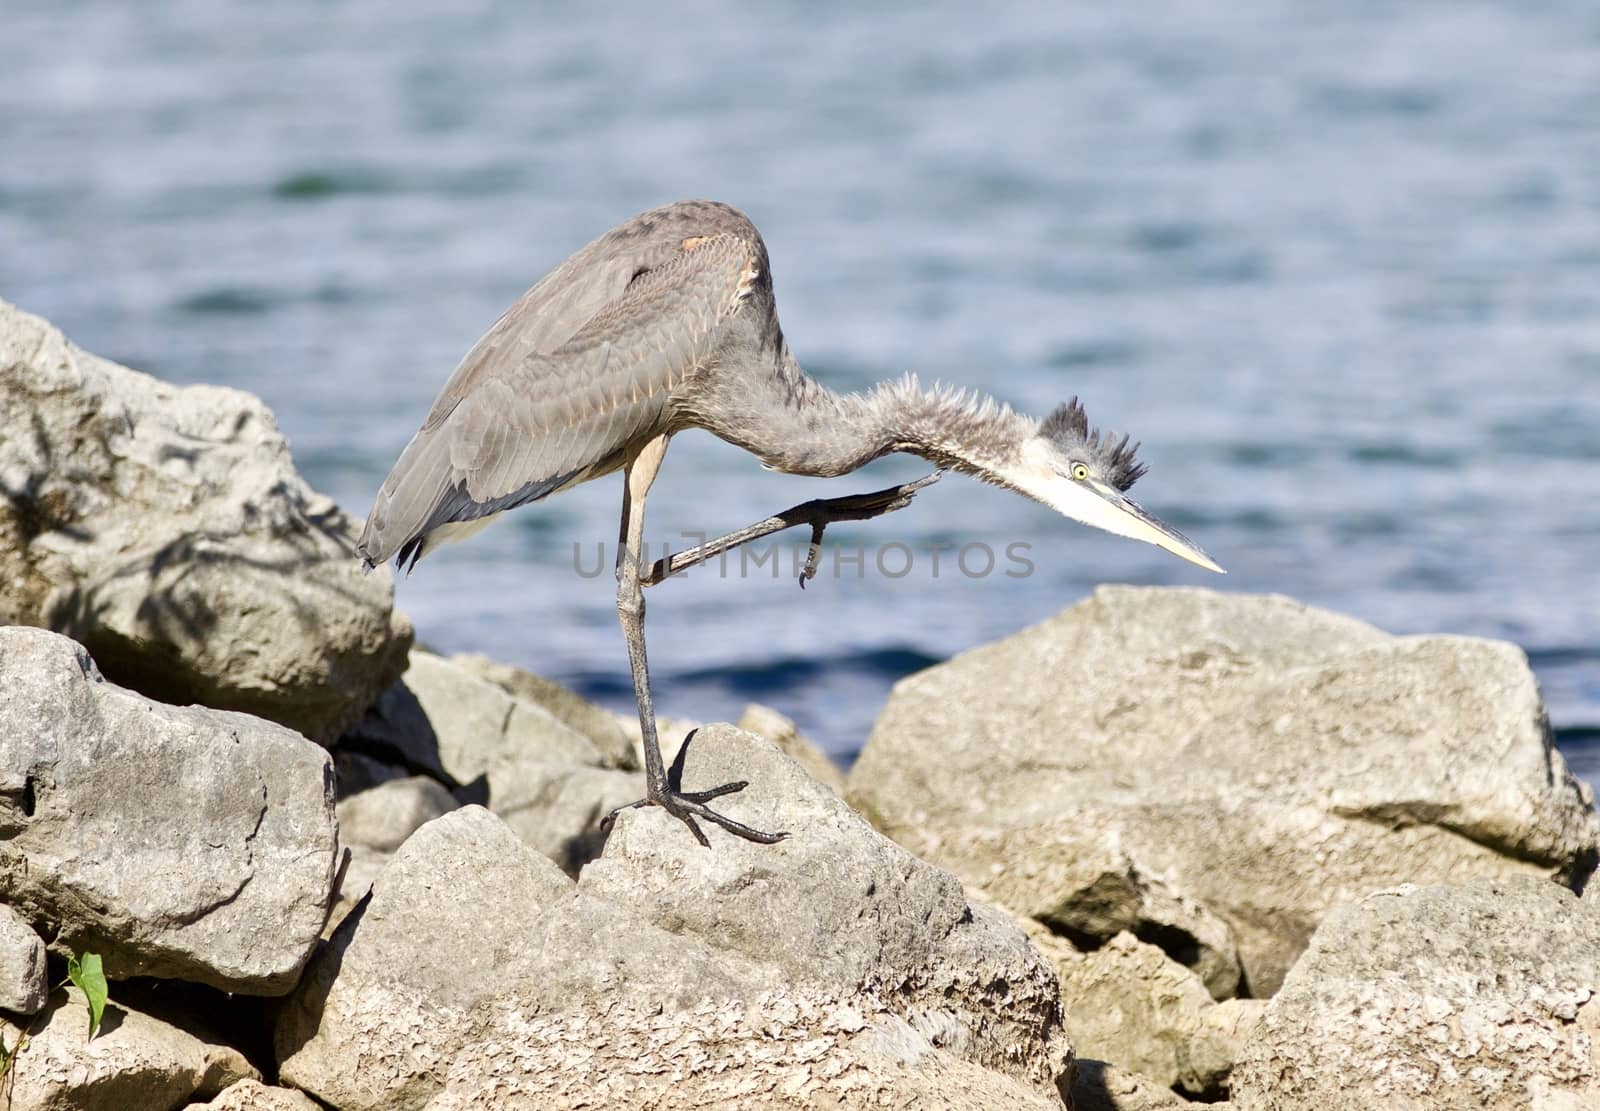 Beautiful background with a funny great heron cleaning his feathers on a rock shore by teo